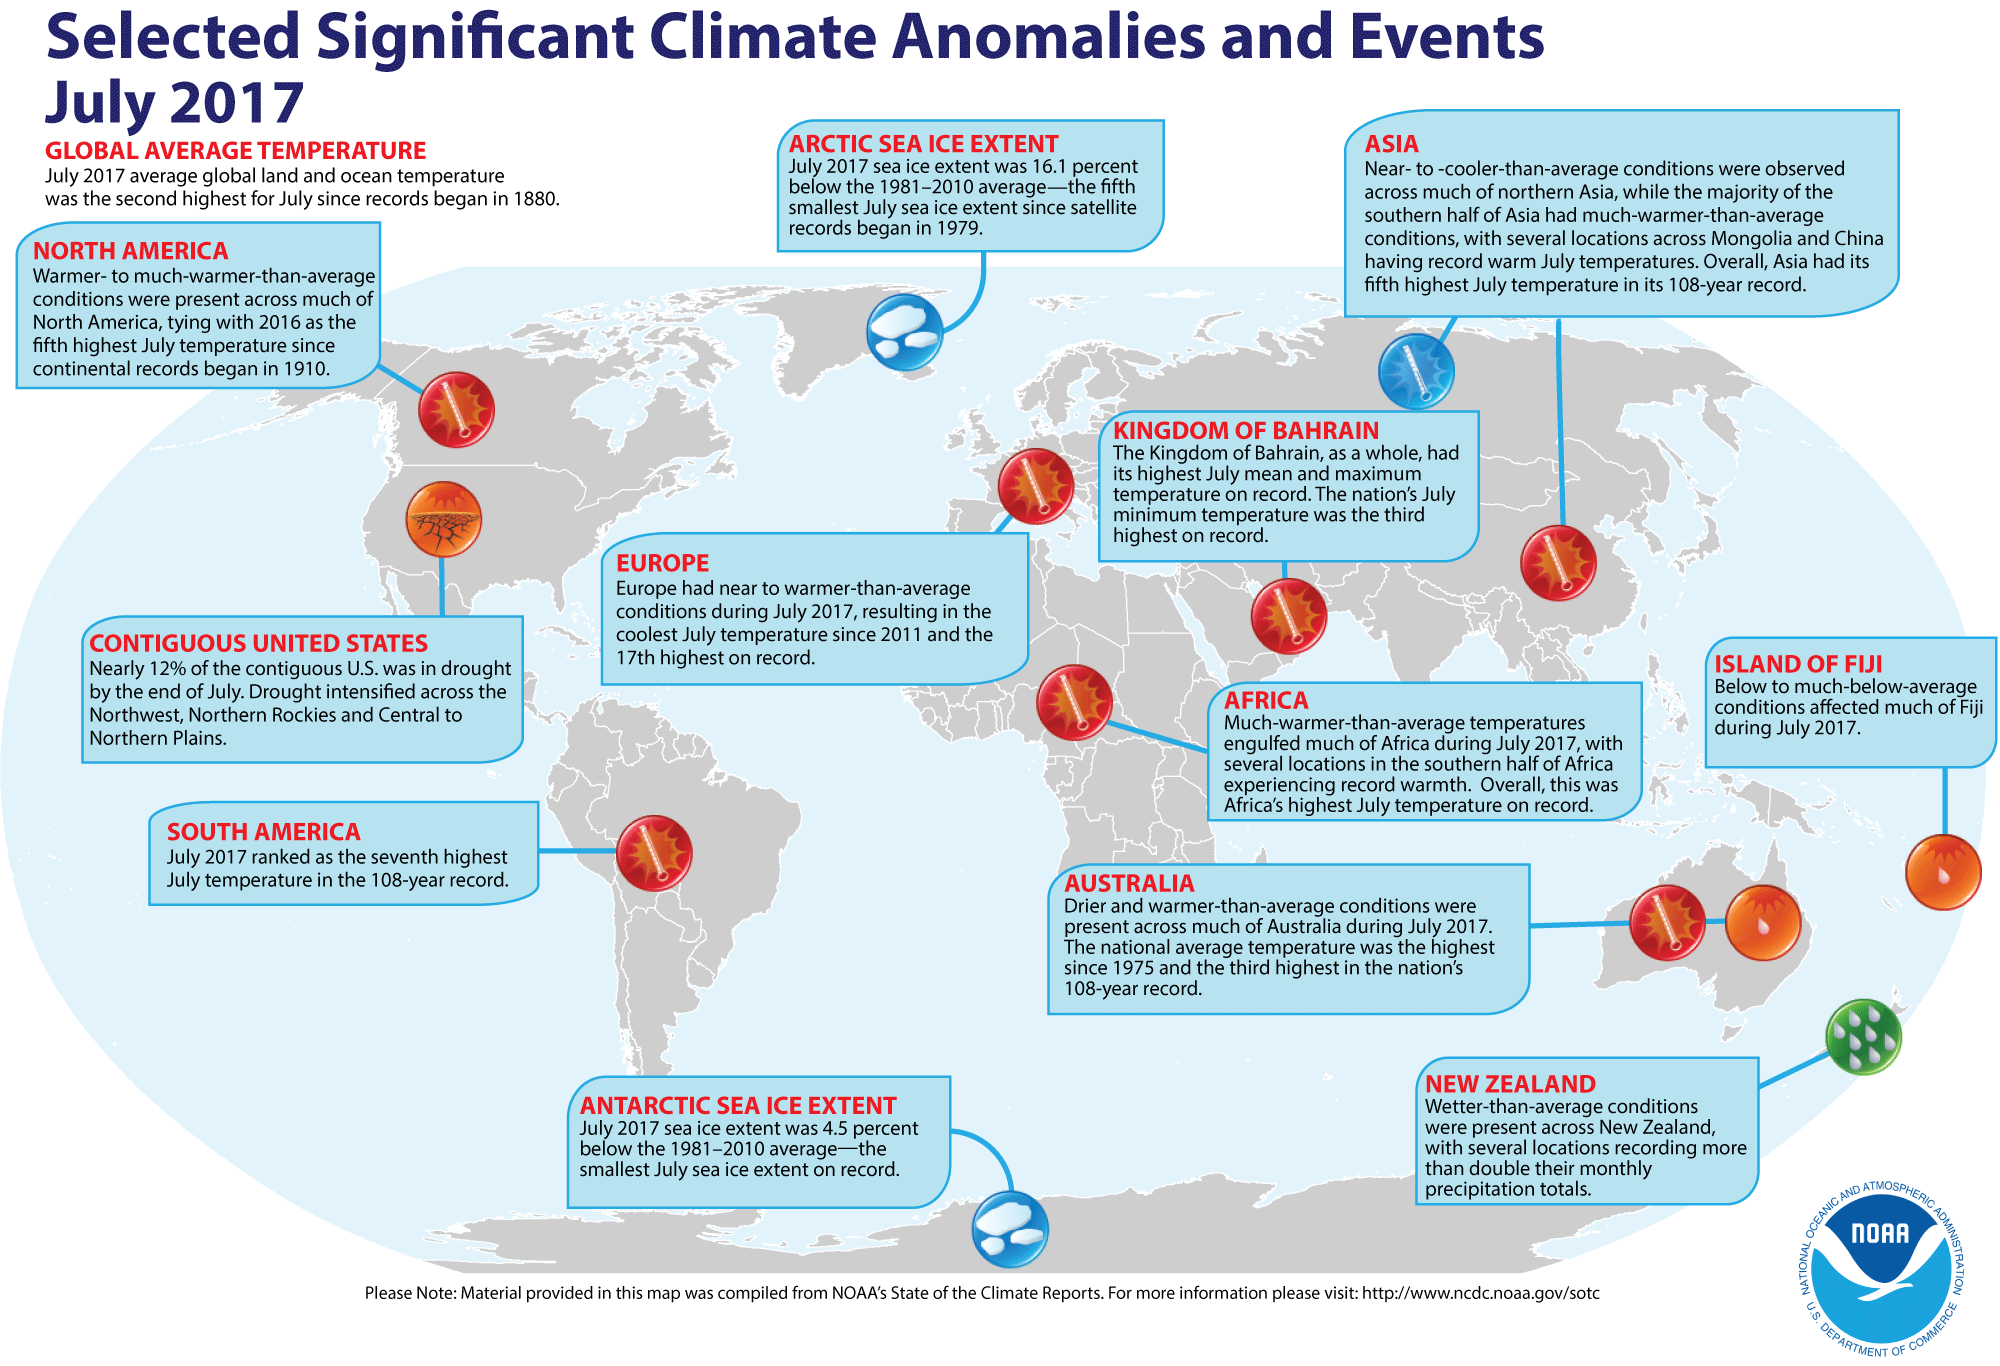 Here are some notable climate events that occurred around the world in July 2017.